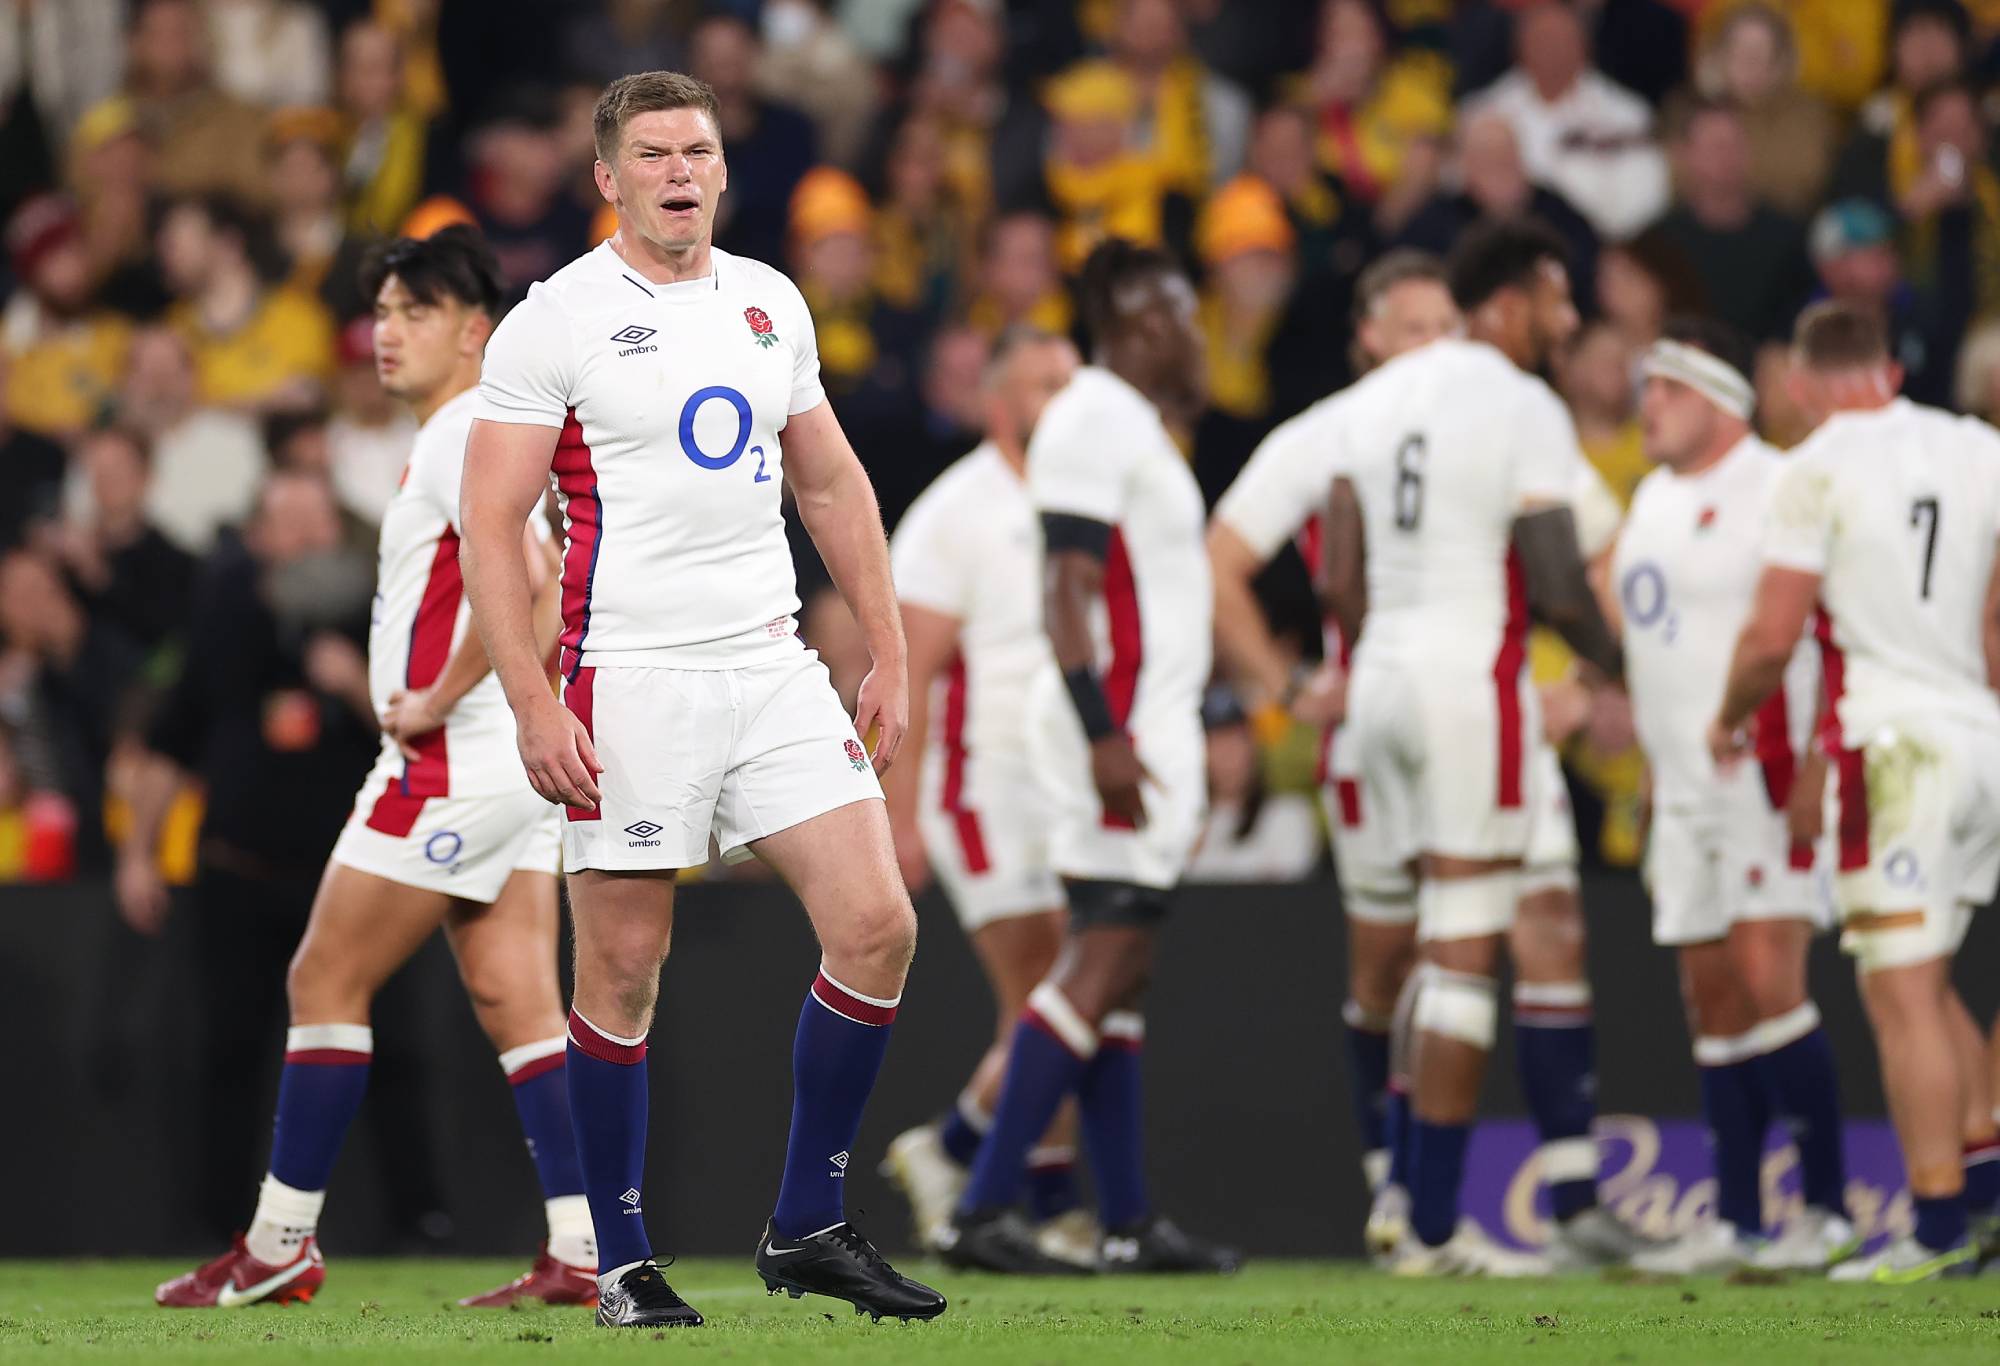 Owen Farrell of England reacts during game two of the International Test Match series between the Australia Wallabies and England at Suncorp Stadium on July 09, 2022 in Brisbane, Australia. (Photo by Cameron Spencer/Getty Images)